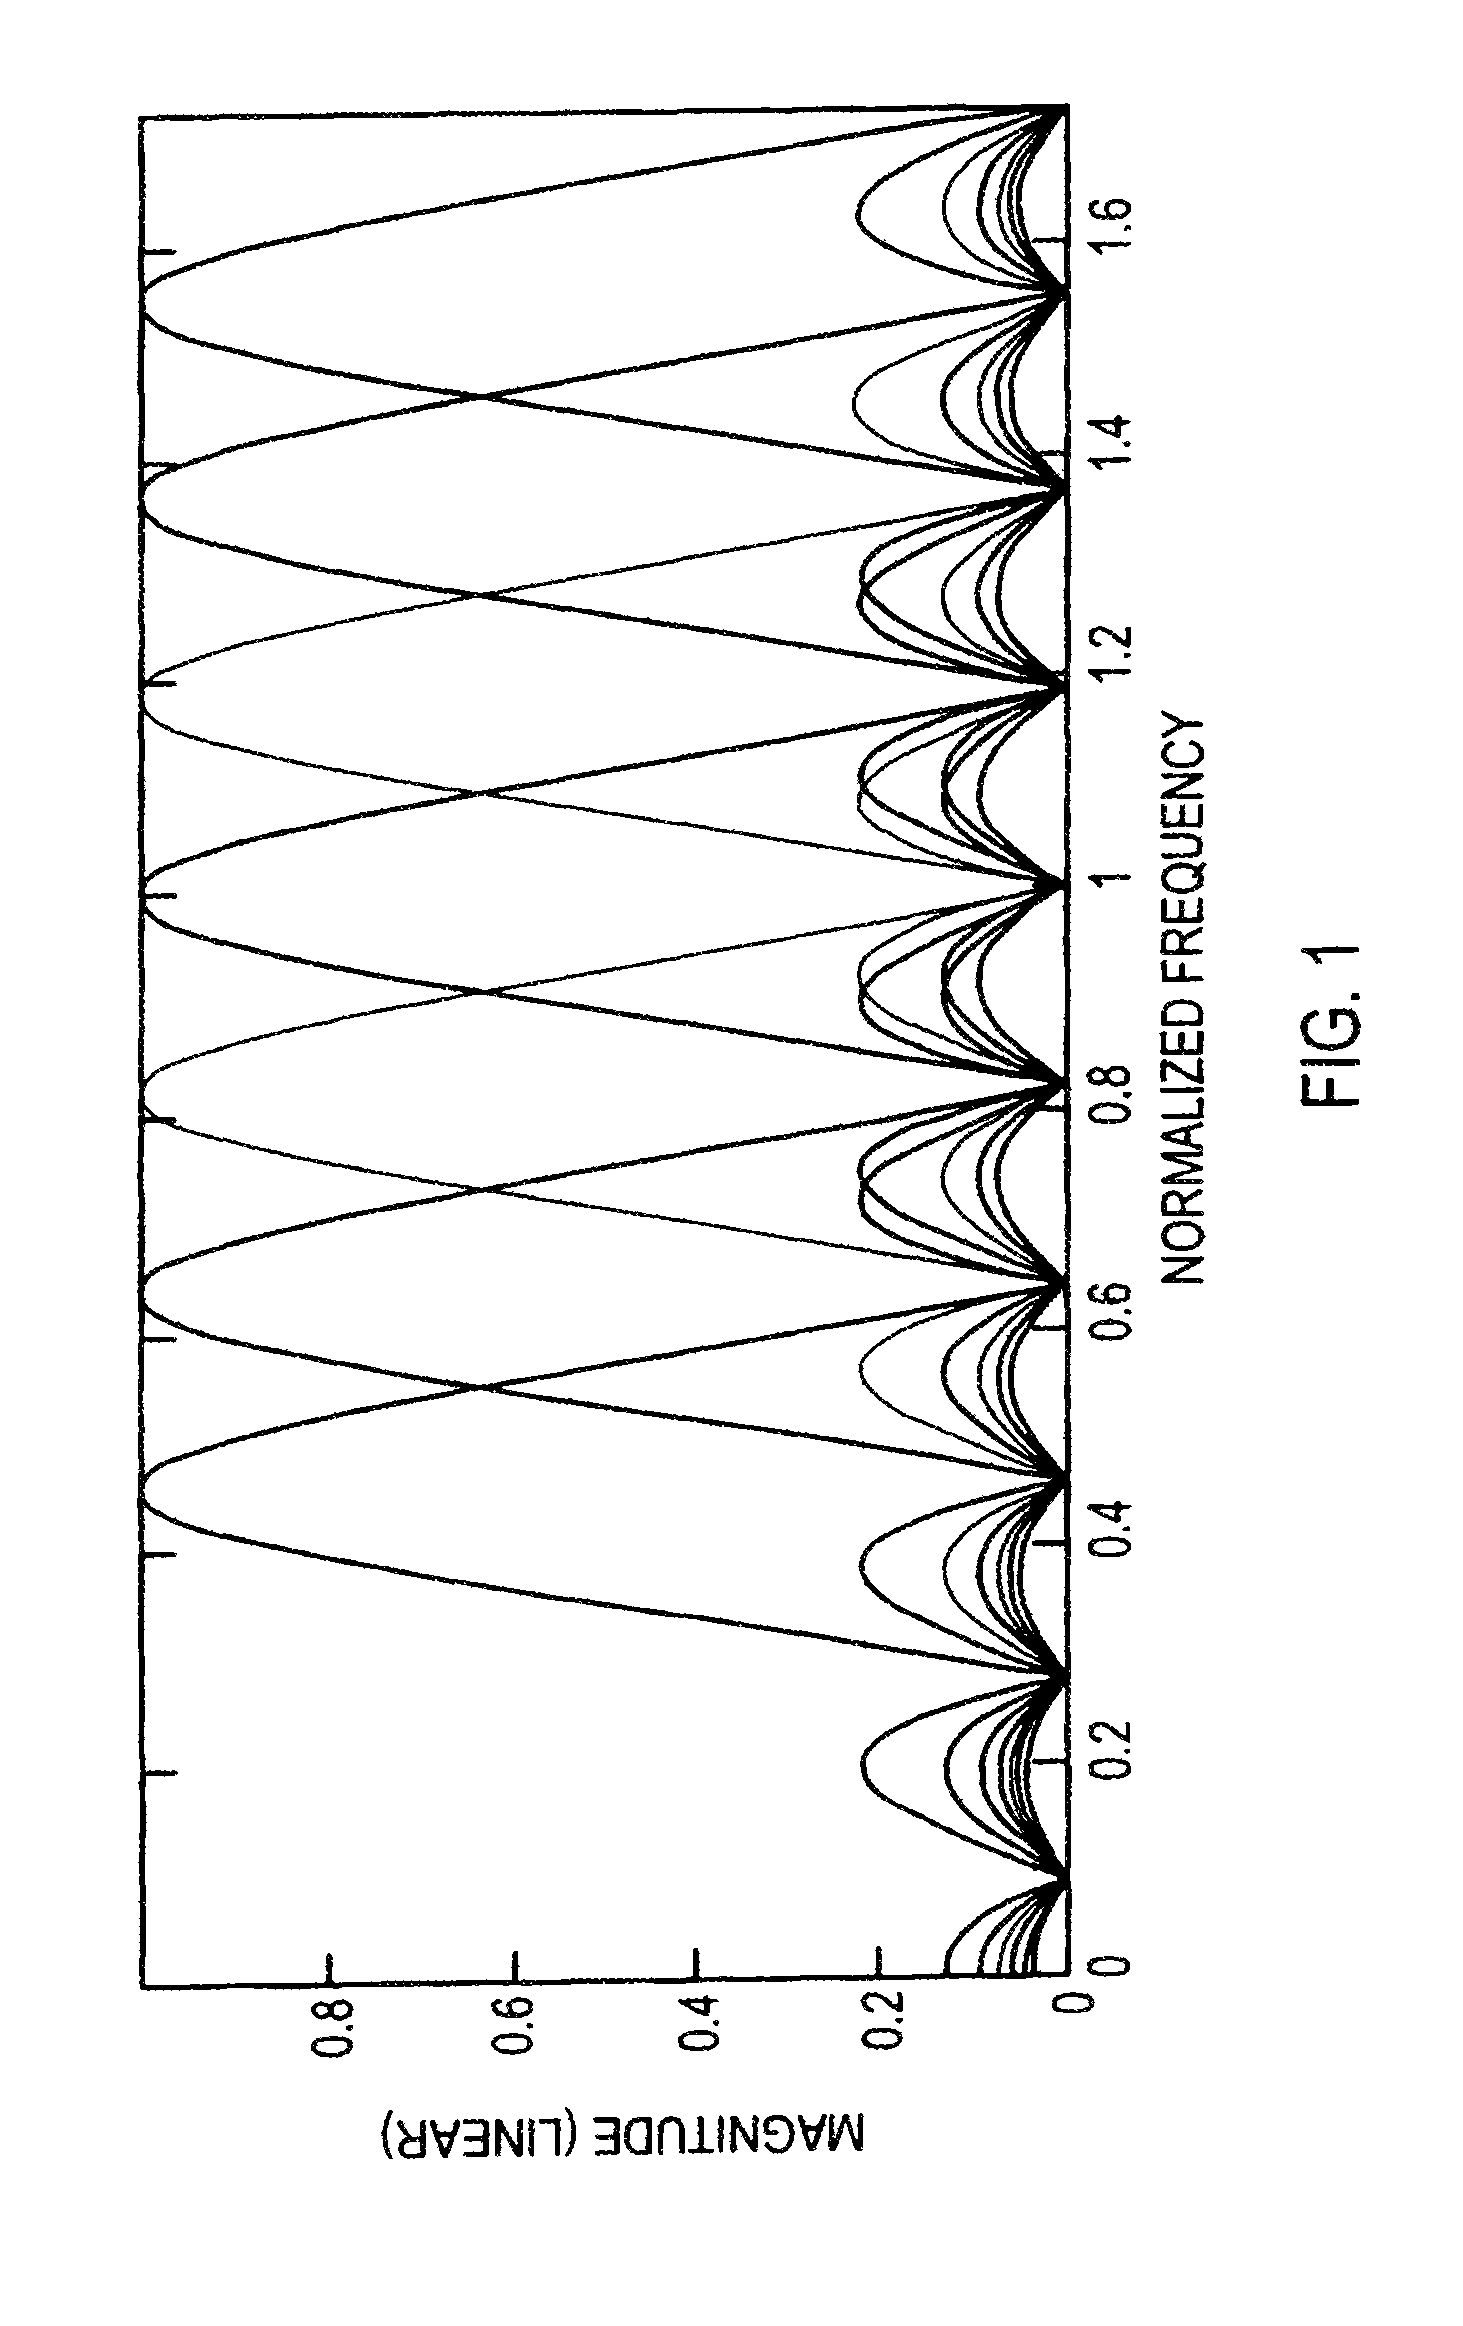 Surface acoustic wave coding for orthogonal frequency coded devices